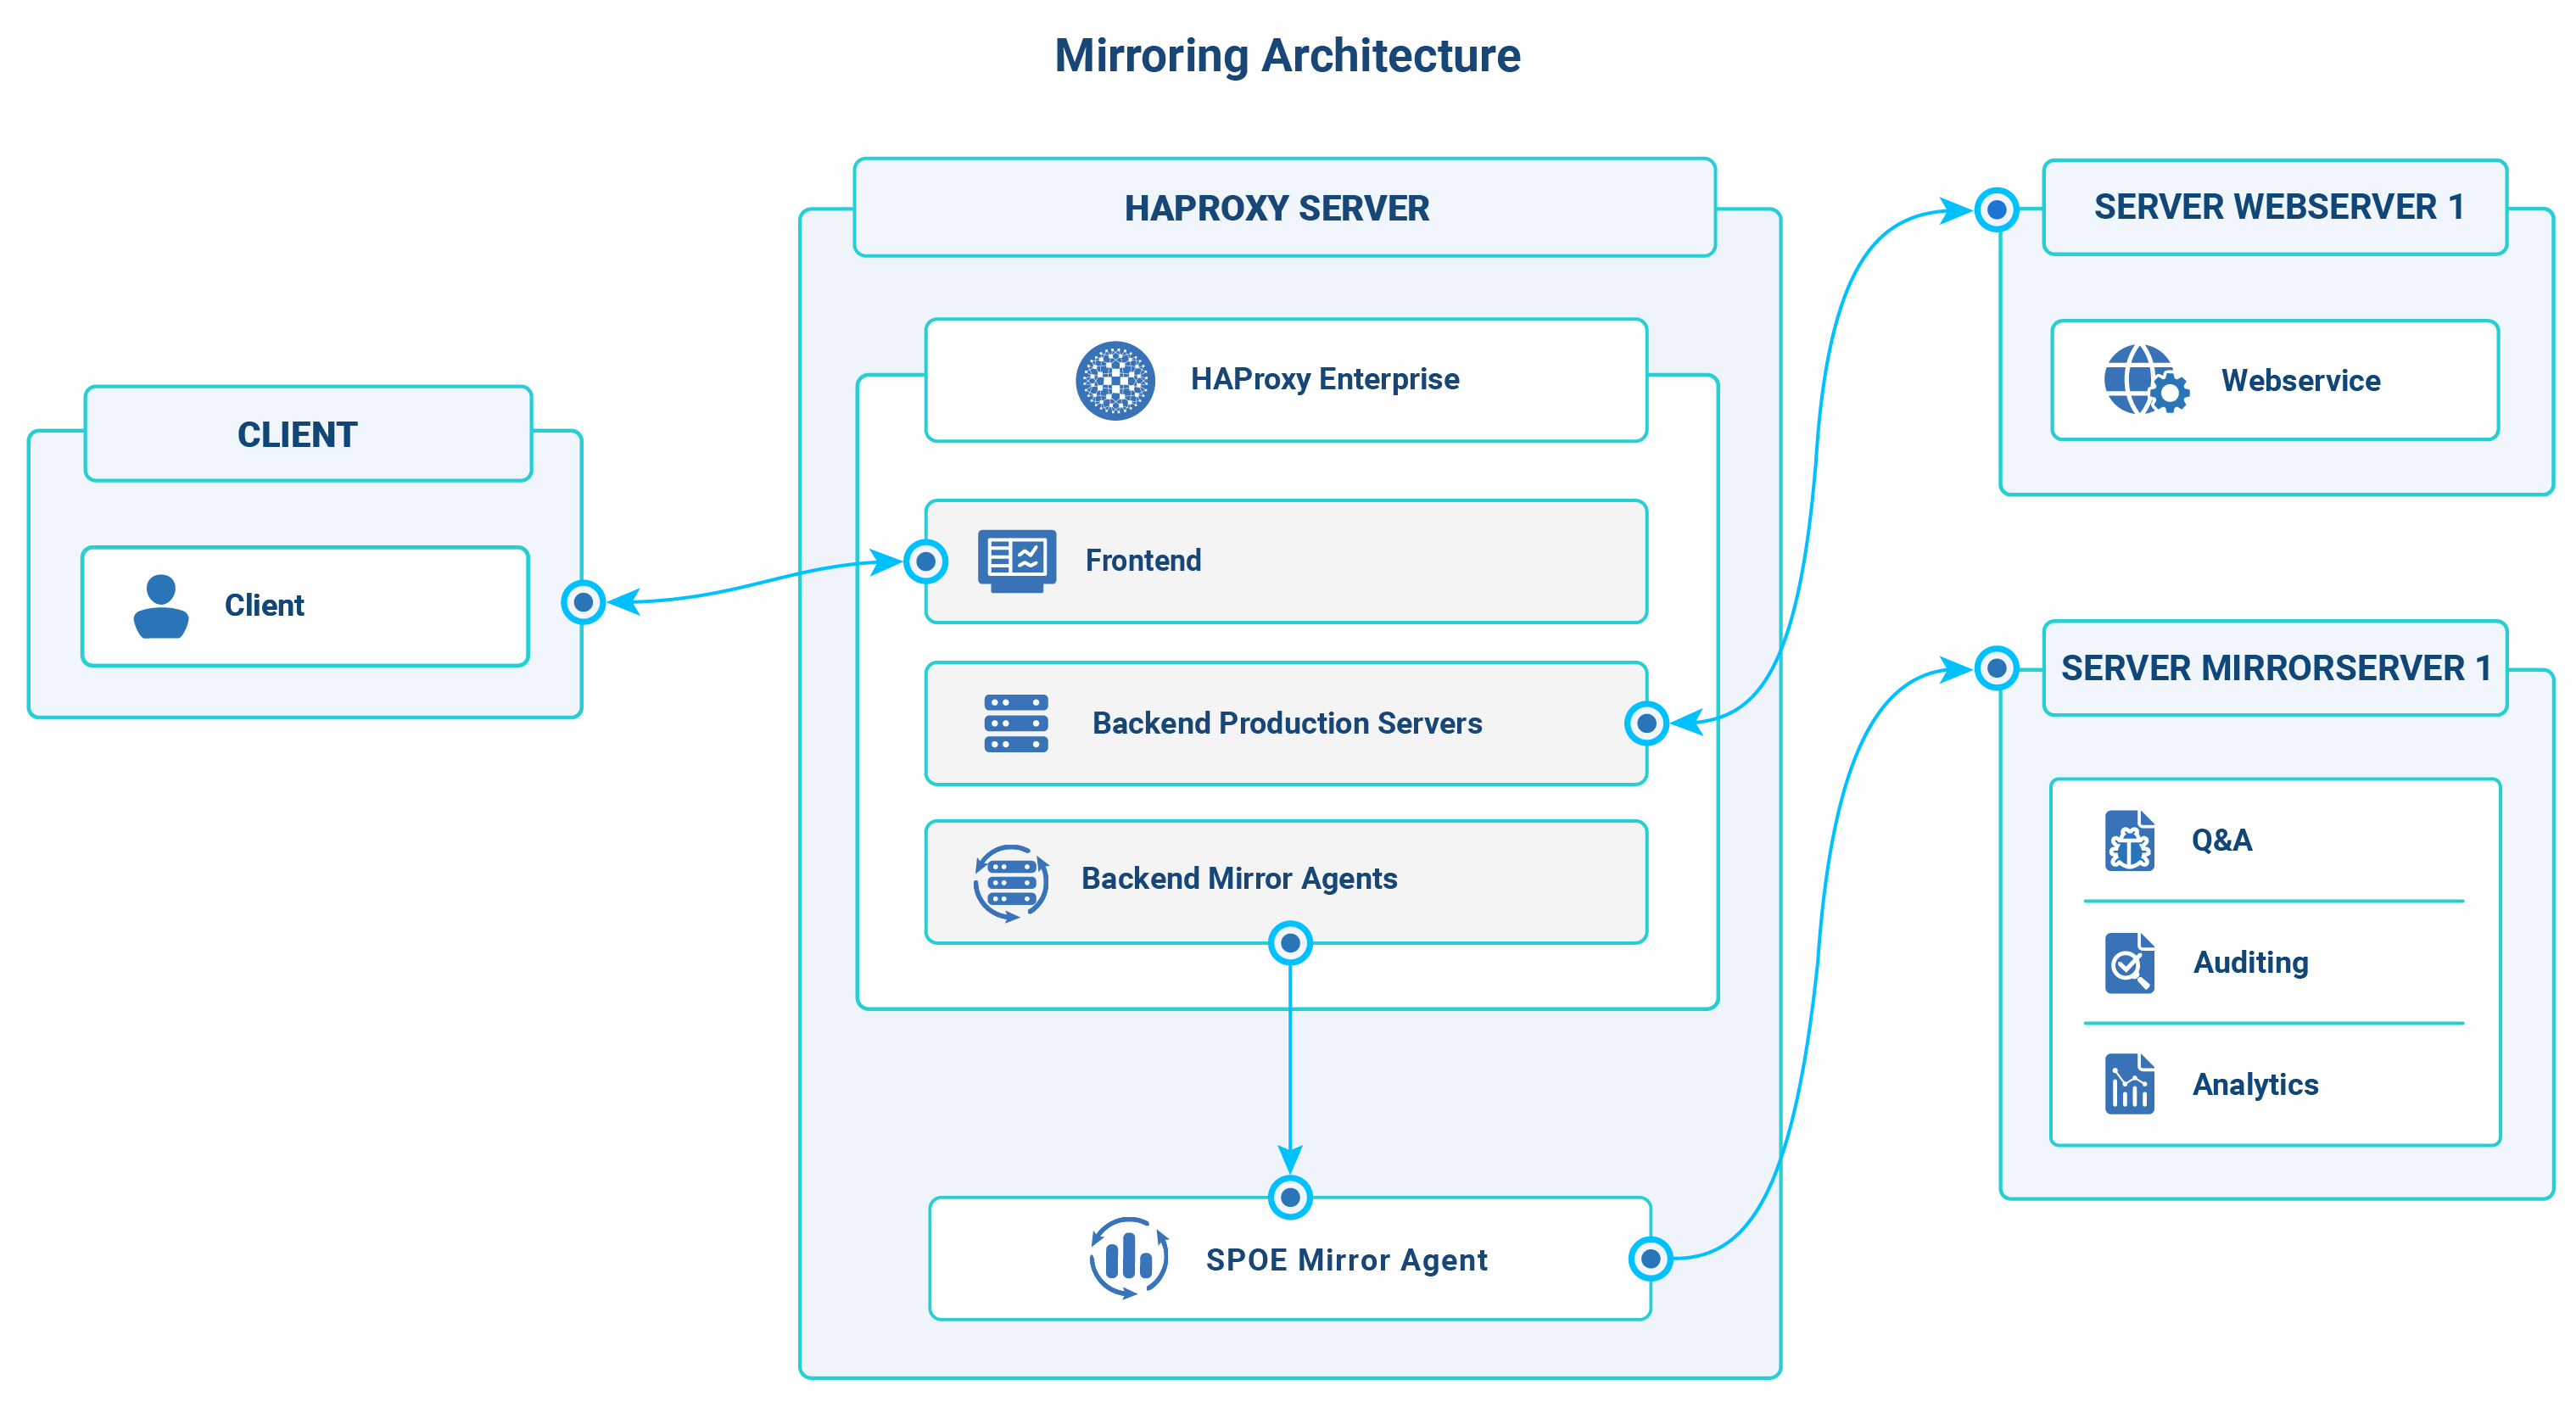 Architecture of Sample Mirroring Deployment